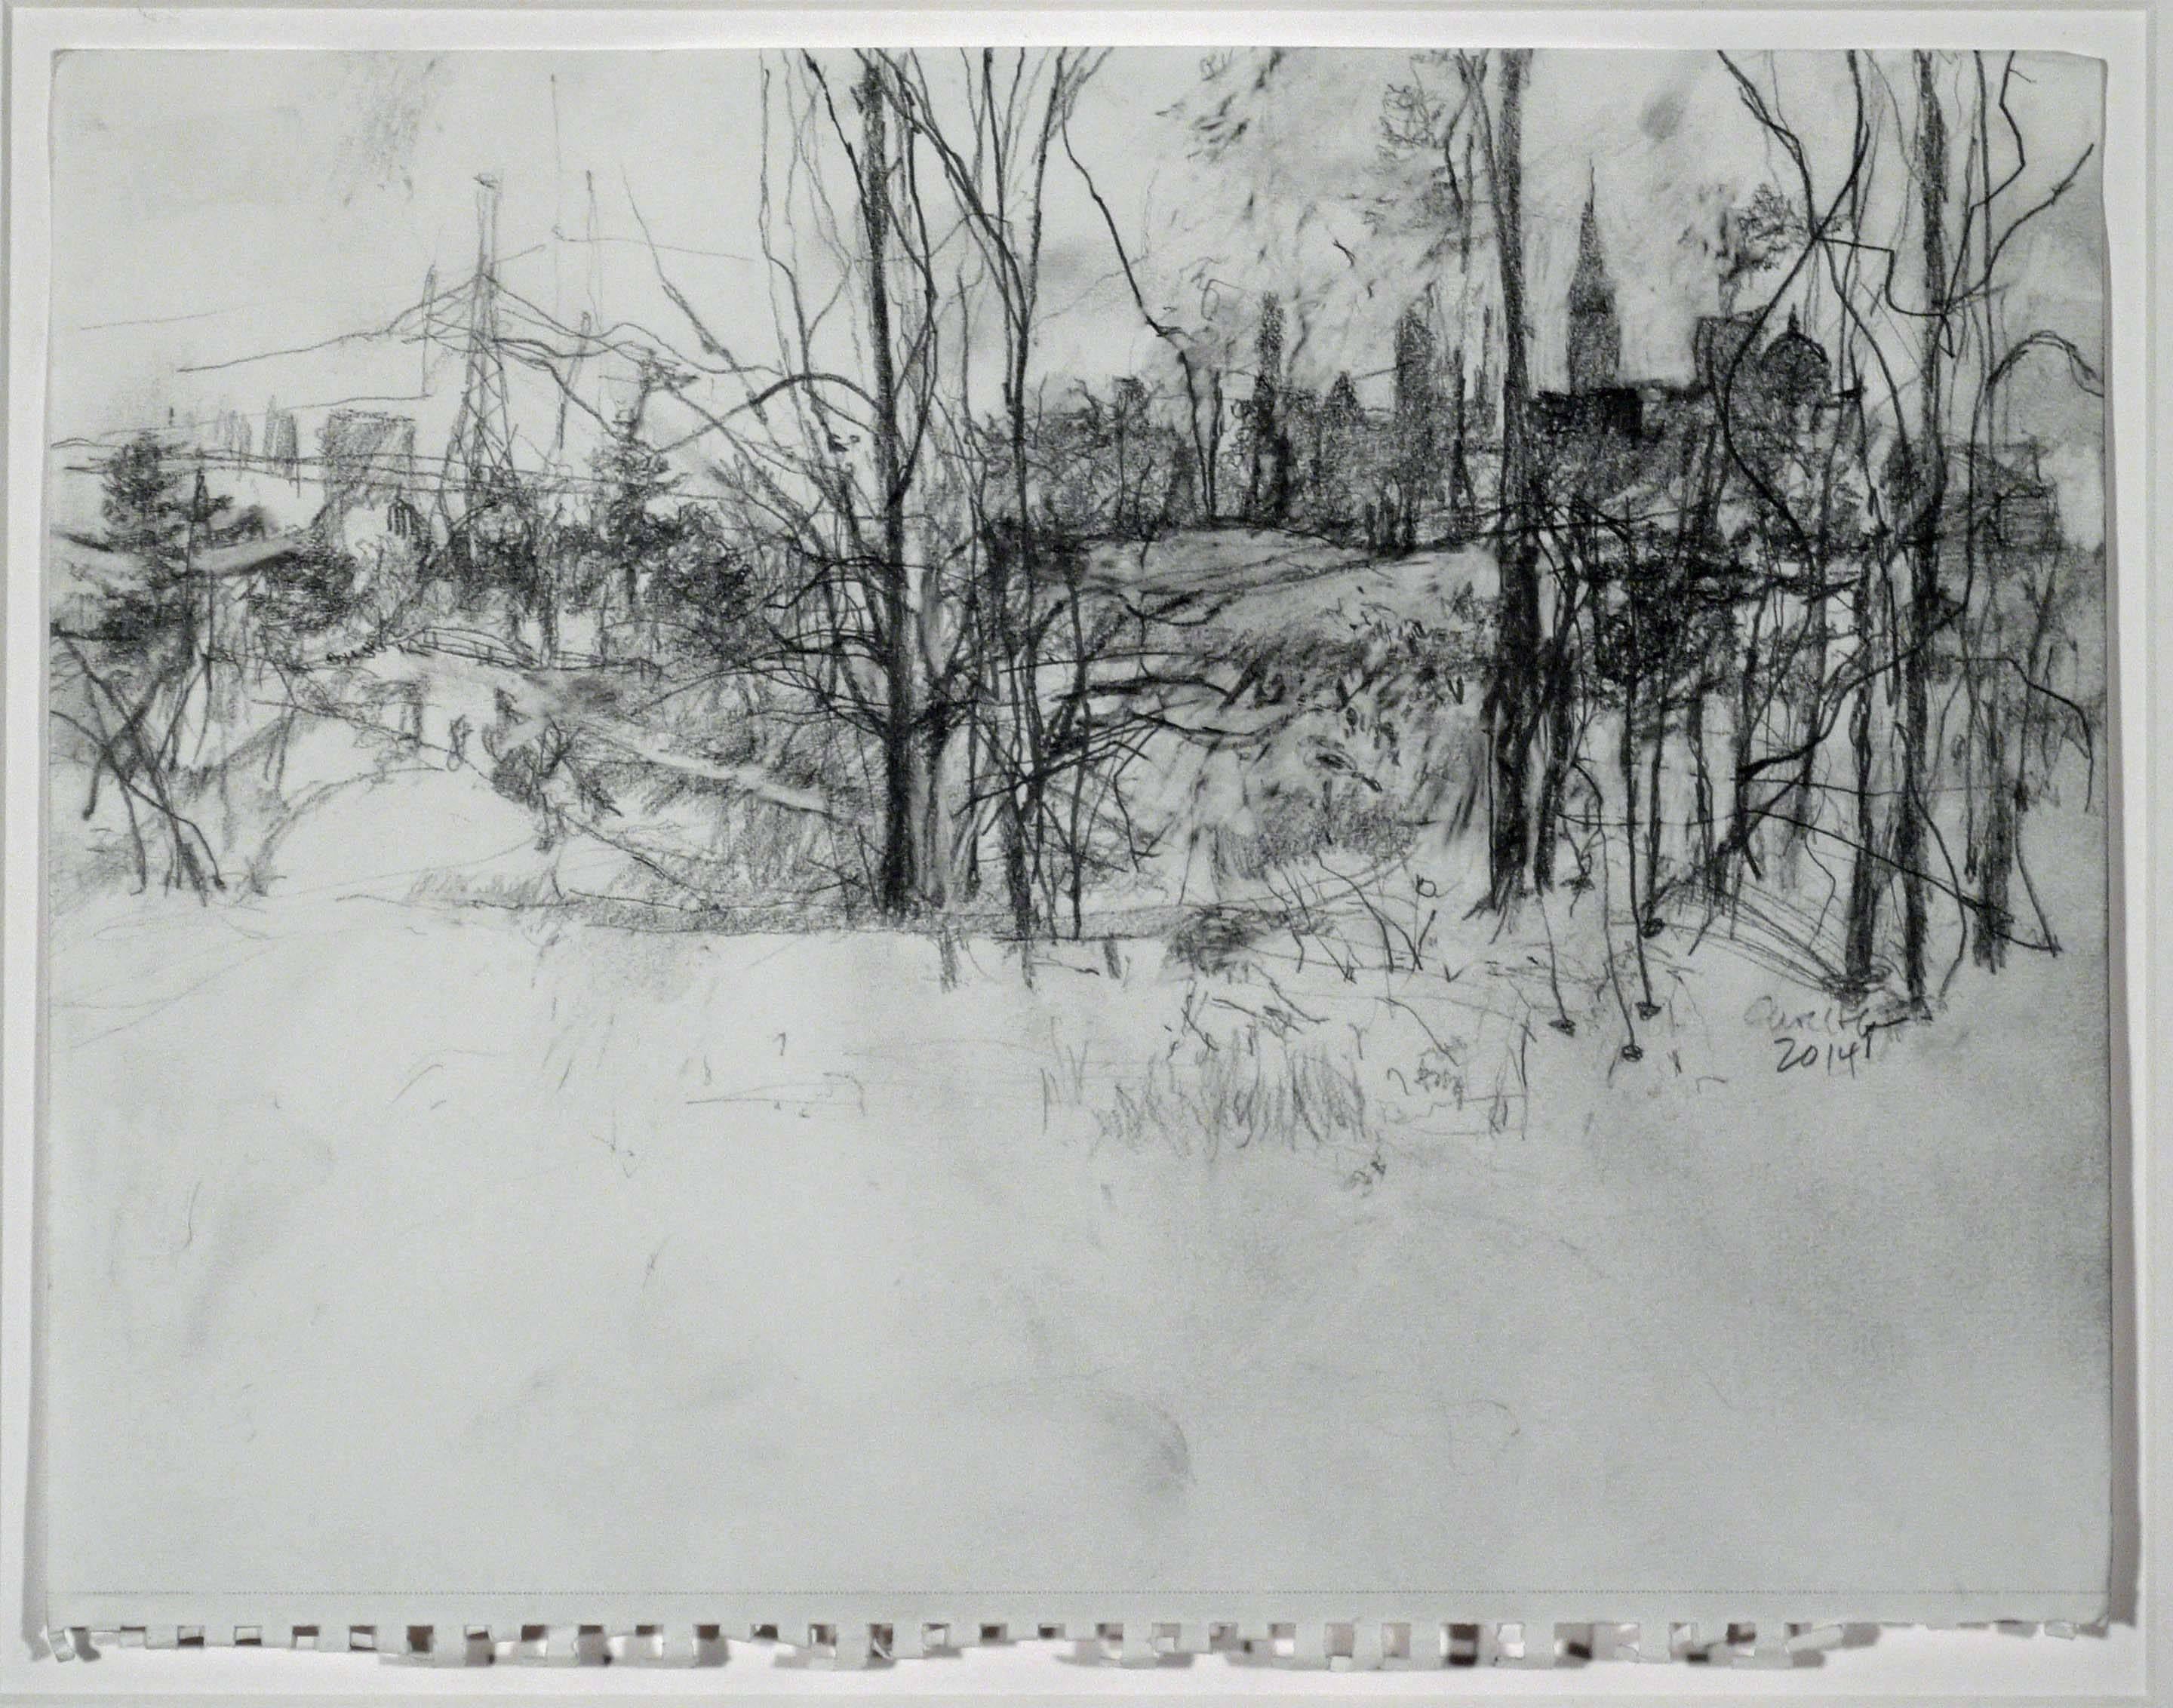 Heft, Carol. LANDSCAPES FROM THE BUS. 
Ink or Pencil on paper, c.2013-2015. Signed and dated. 
Circa 13 3/4 x 11 inches or the reverse. 
In excellent condition. Carol Heft is an American artist based in New York. 
Among her activites, she teaches